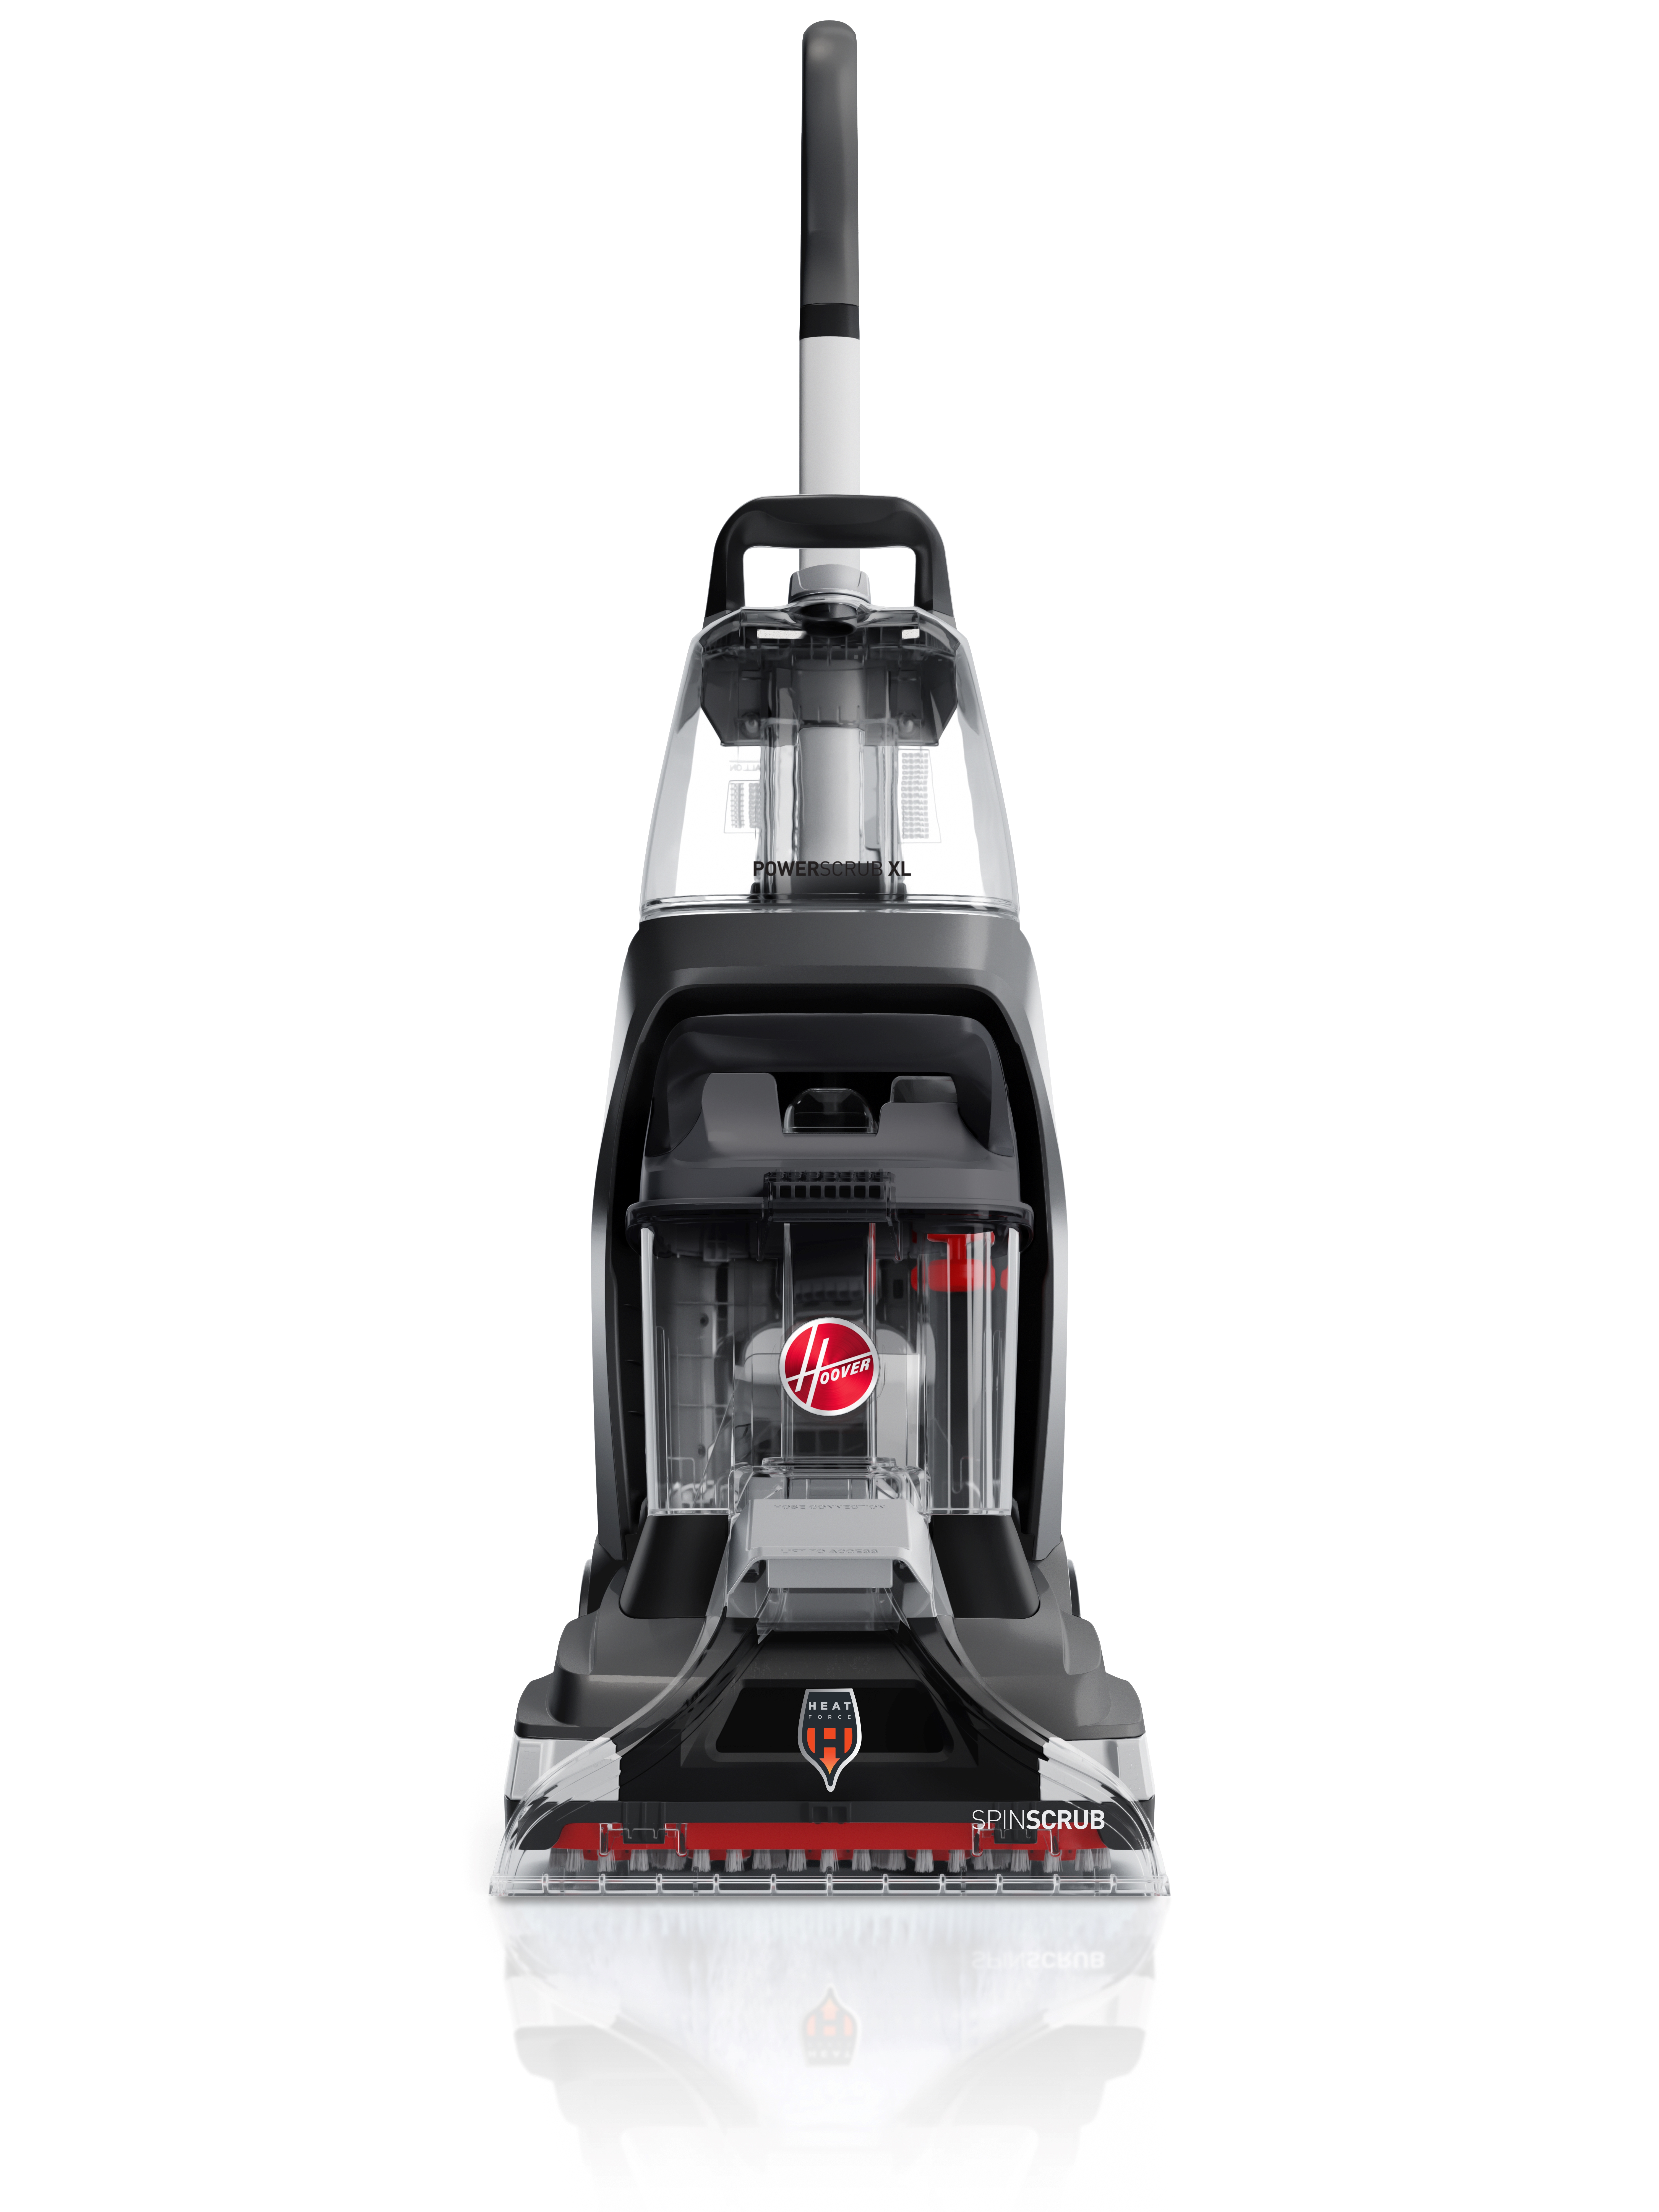 Hoover PowerScrub XL, Upright Carpet Cleaner Machine, FH68010, 1 Count - image 1 of 11